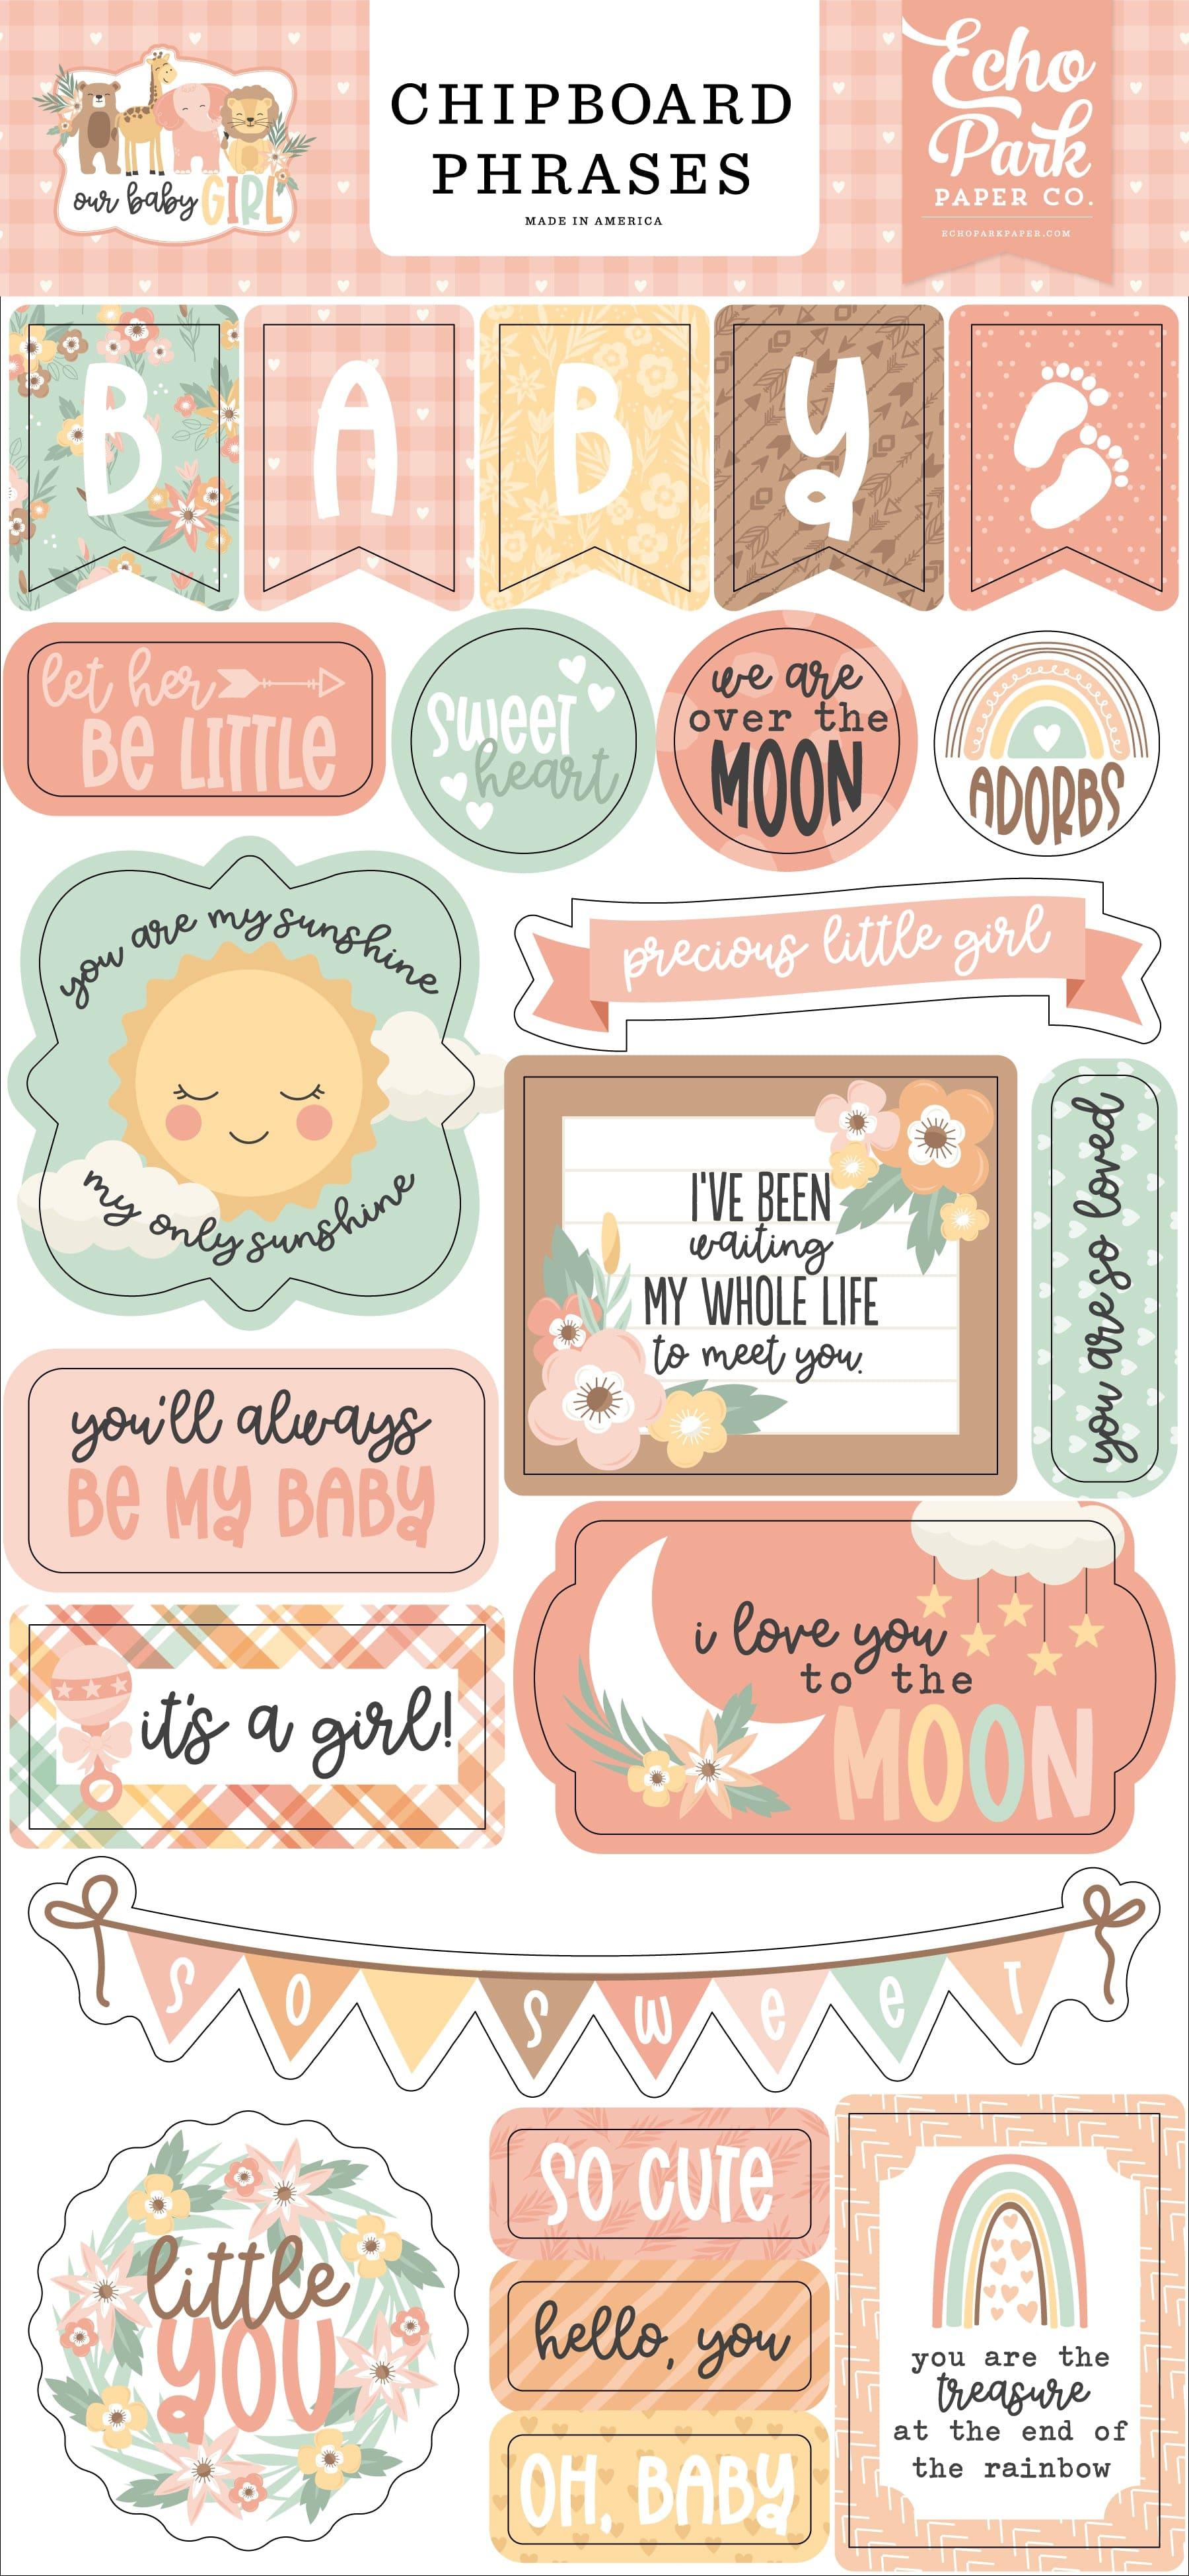 Our Baby Girl Collection 6 x 12 Scrapbook Chipboard Phrases by Echo Park Paper - Scrapbook Supply Companies